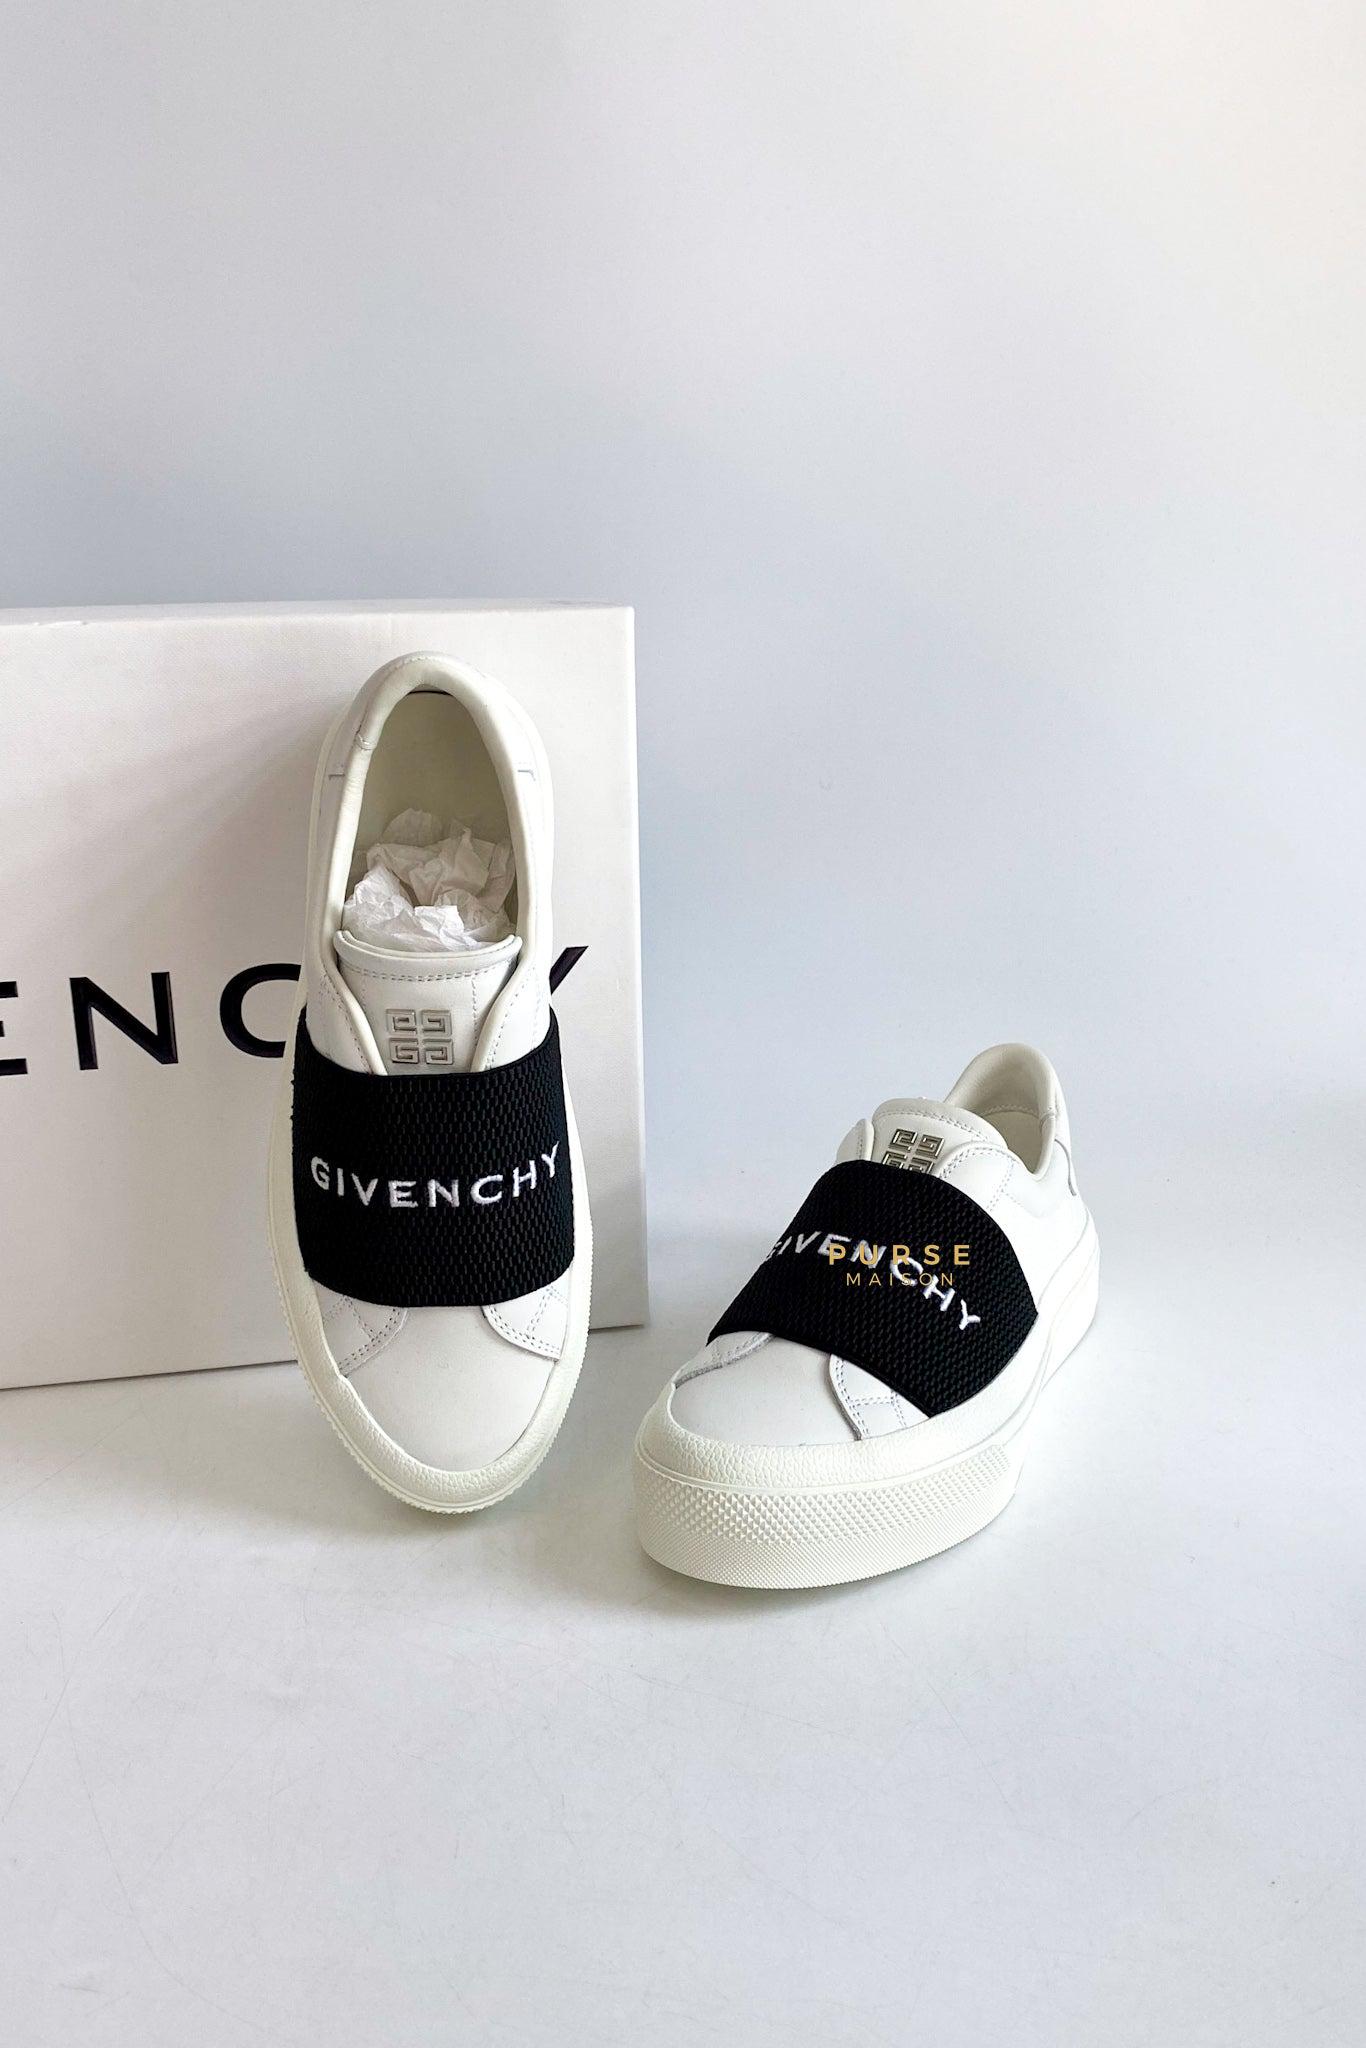 Givenchy Elastic City Court Sneaker in White & Black (Size 35 EUR)